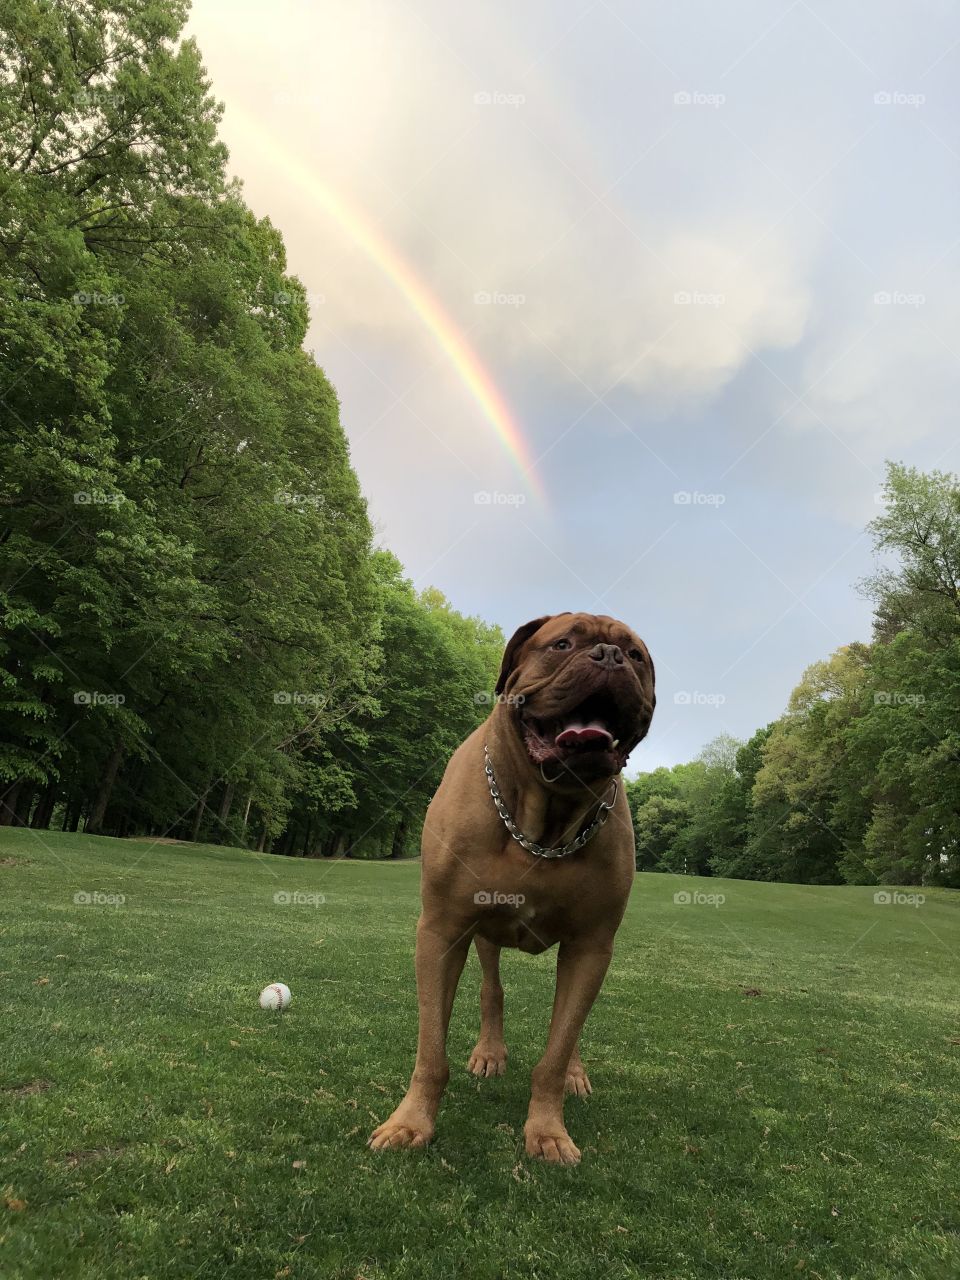 At the end of the rainbow 